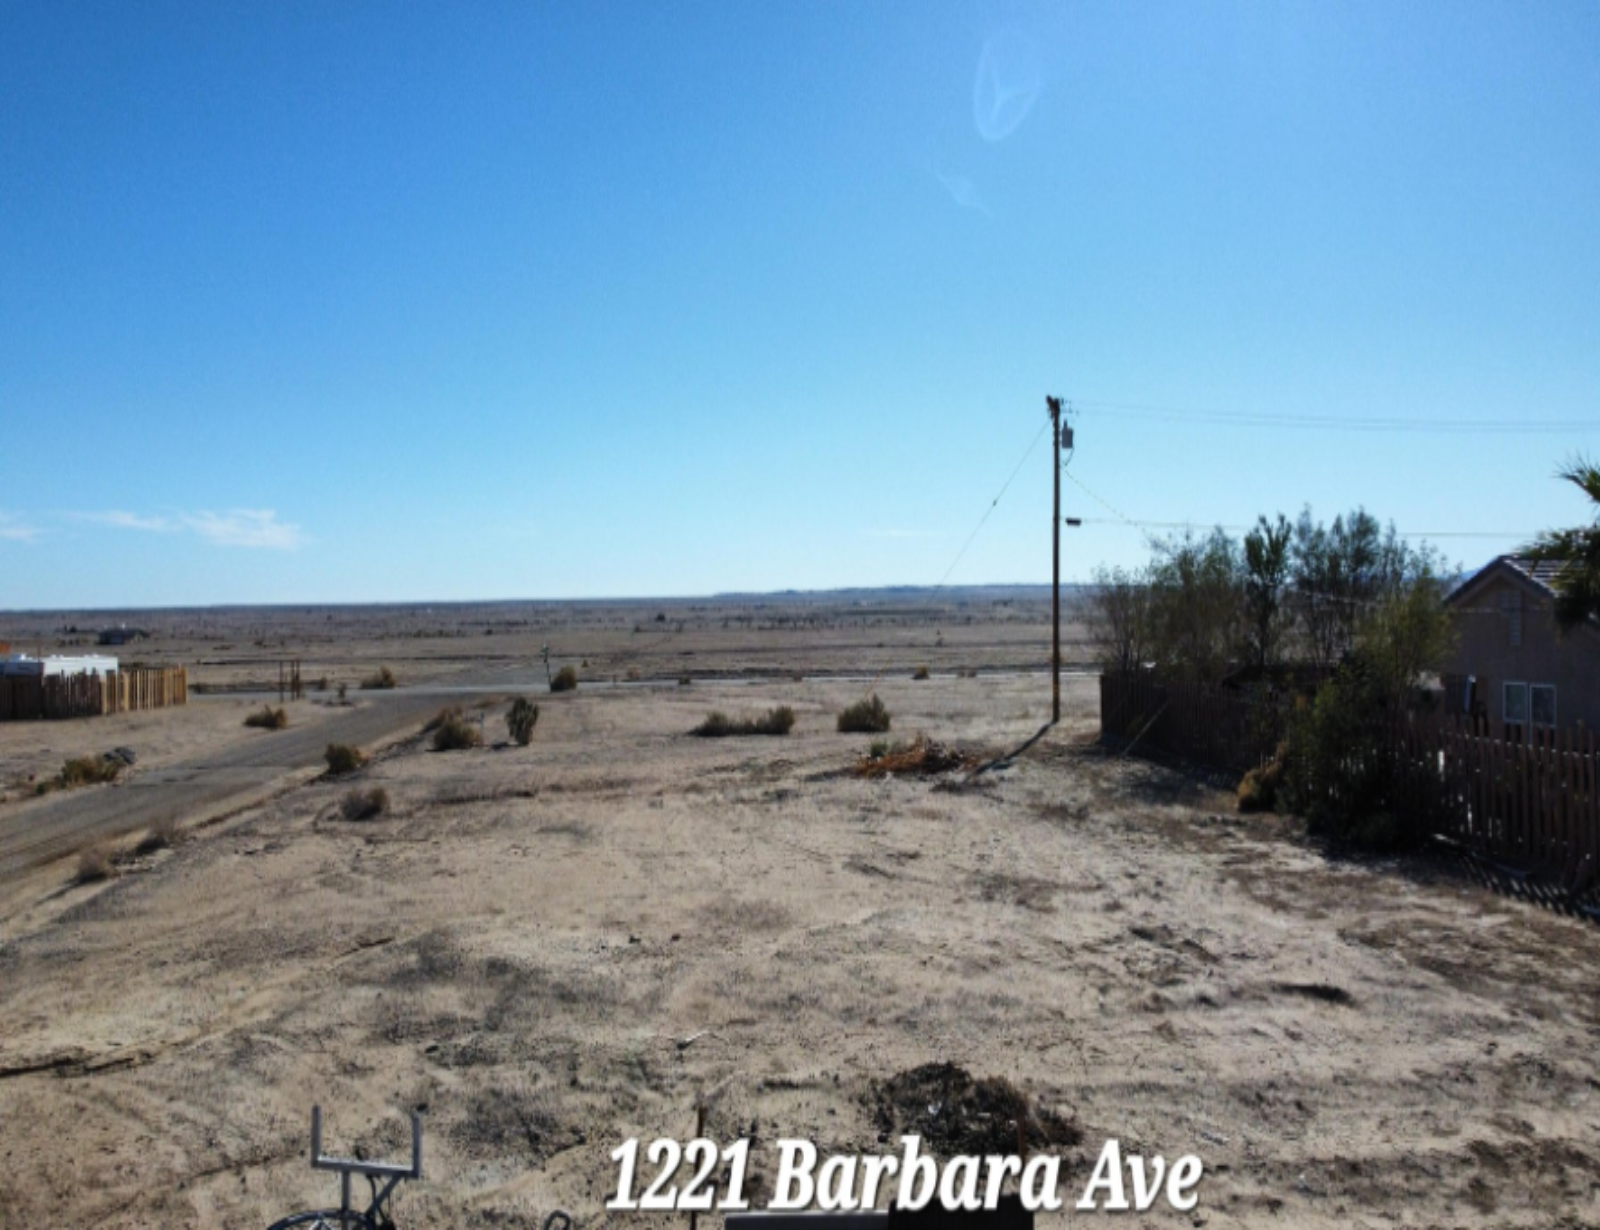 SOLD!! AMAZING CORNER LOT ON THE WEST SIDE OF HIGHWAY 86!! LOW MONTHLY PAYMENTS OF $225.00   1221 Barbara Ave., Salton City, CA 92275  APN: 017-802-001-000 - Get Land Today